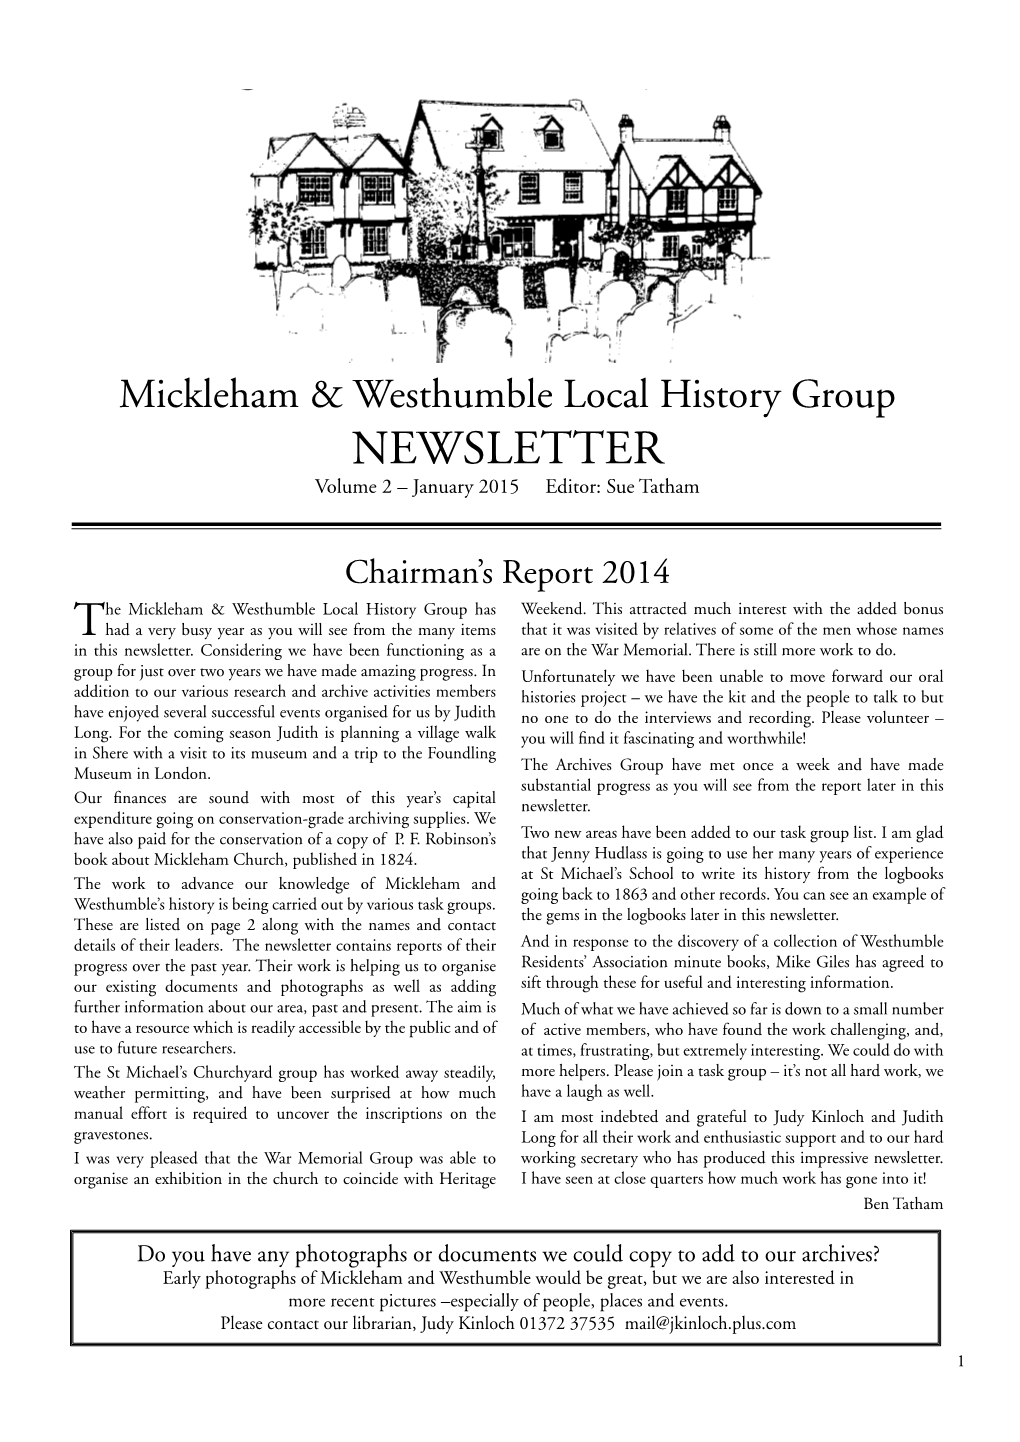 Mickleham & Westhumble Local History Group, Mickleham, Dorking